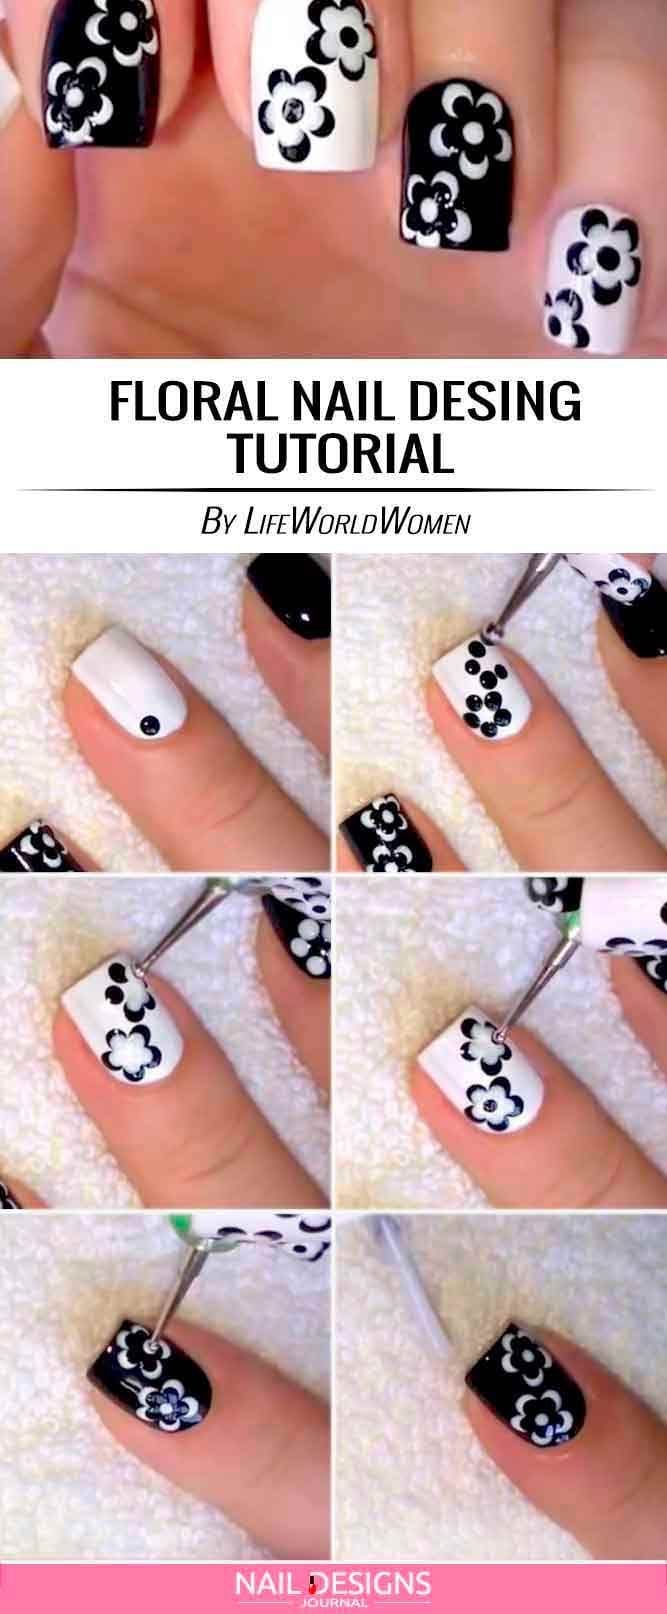 [ad_1]

Cute And Easy Nail Designs to Do at Home â˜… See more: naildesignsjourna… #nails
Source by chanderkalaramd
[ad_2]
			
			…